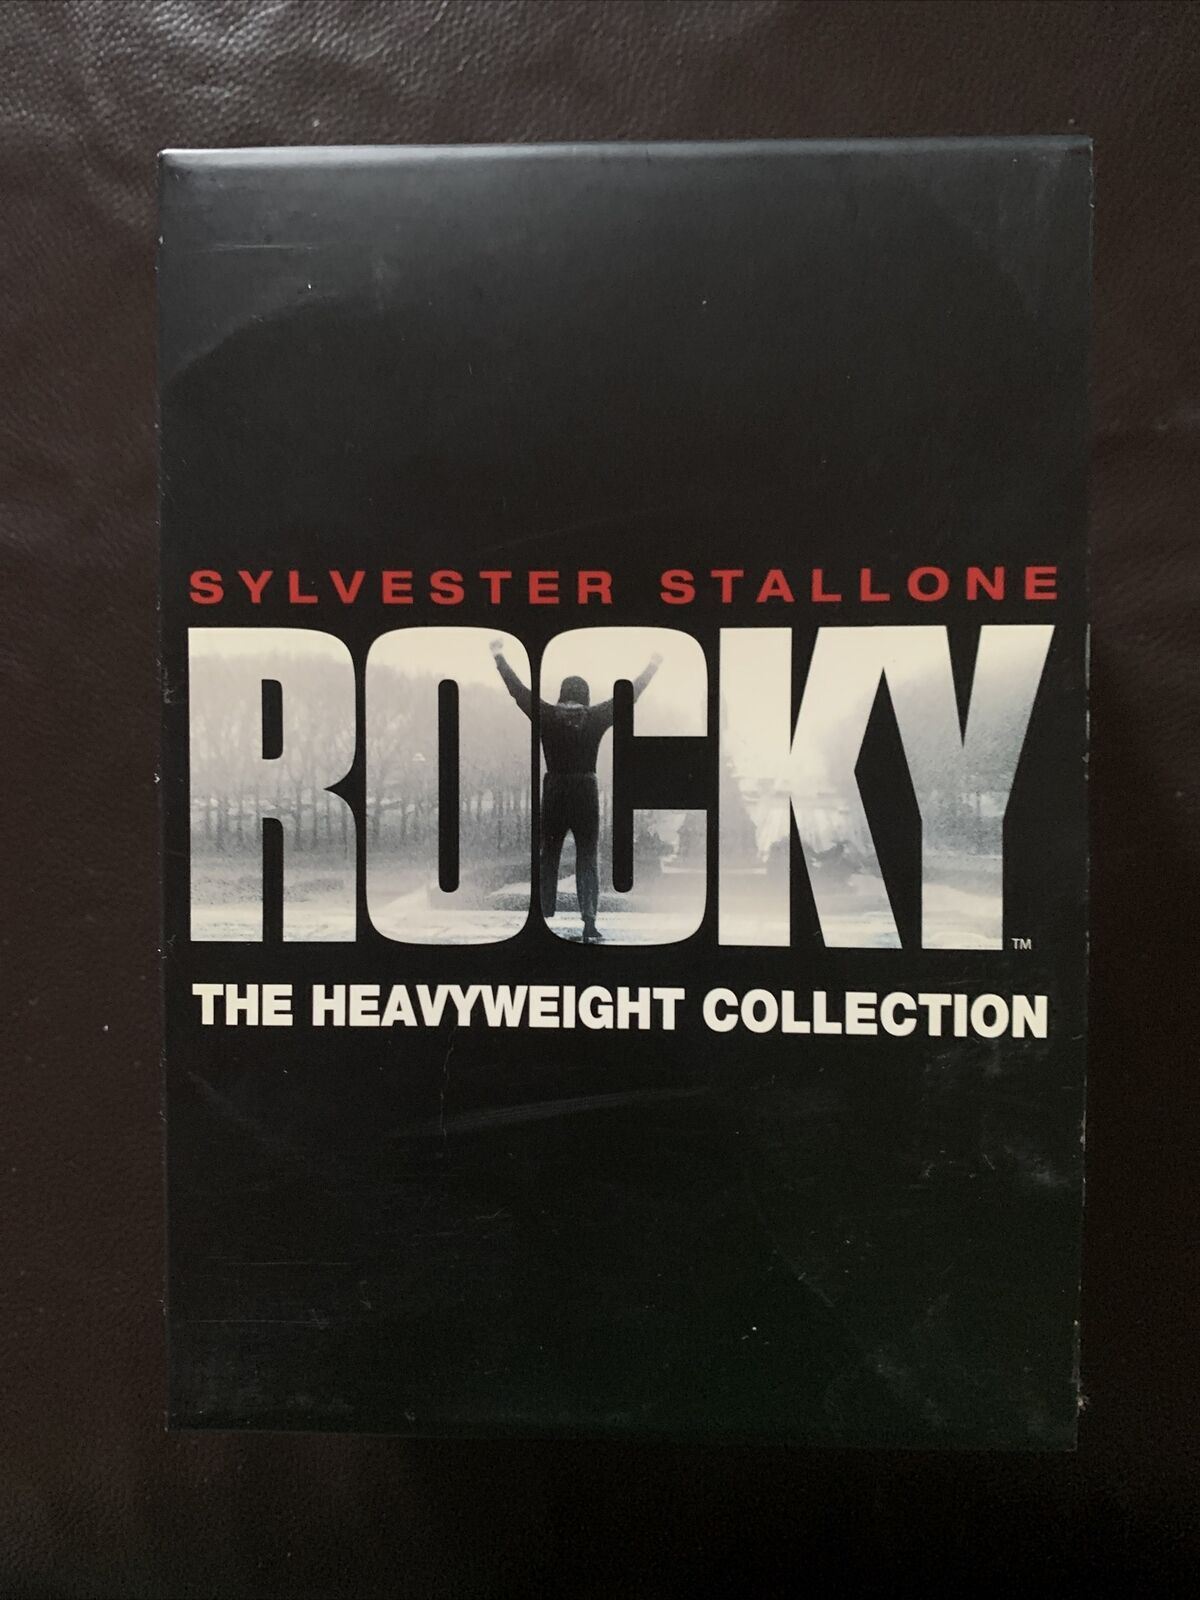 Sylvester Stallone: Rocky - The Heavyweight Collection (DVD, 2007) Region 4